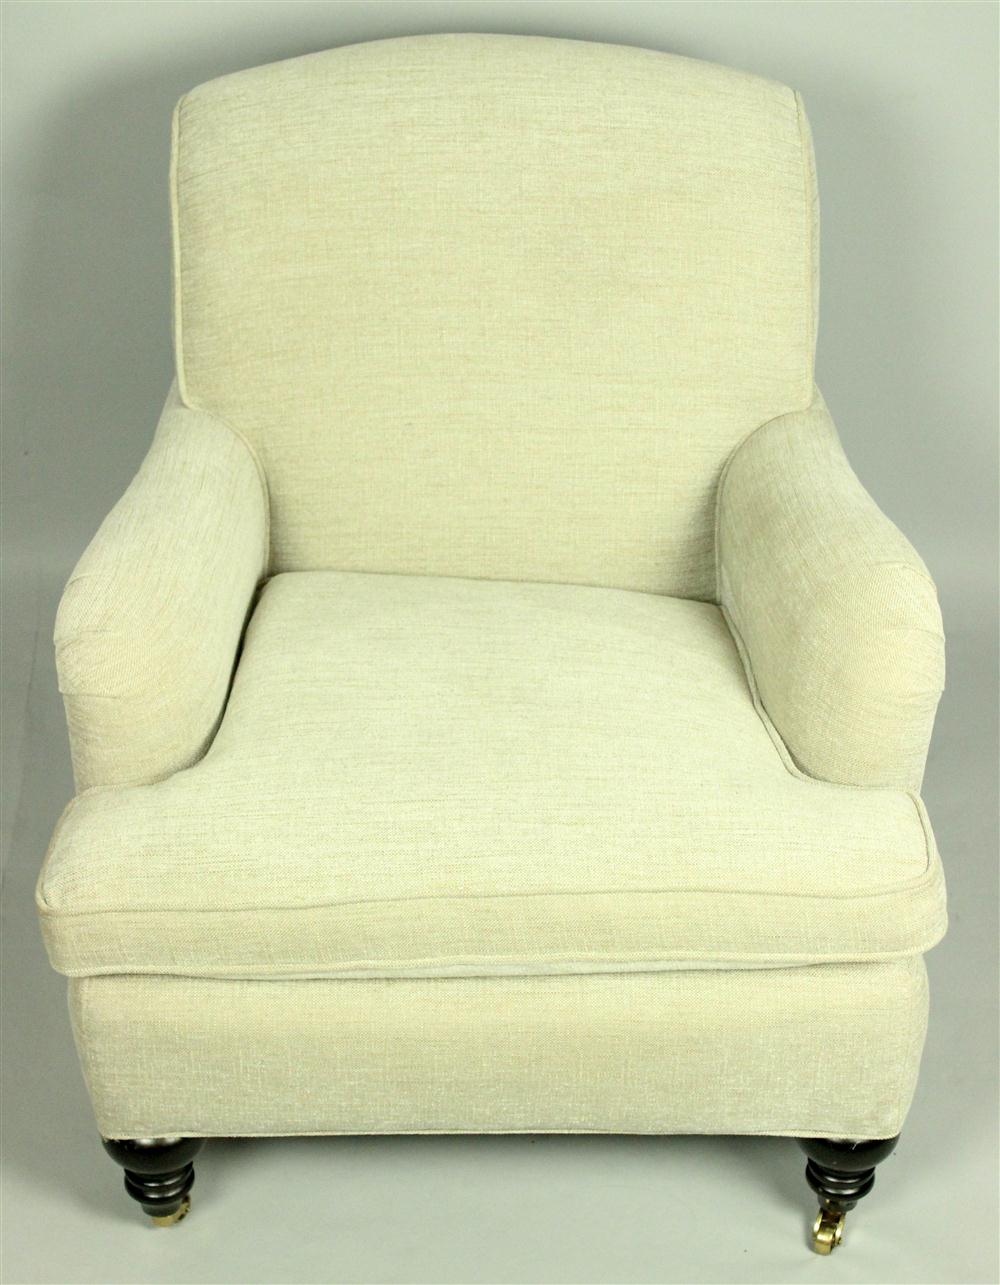 PETITE OFF WHITE UPHOLSTERED CLUB